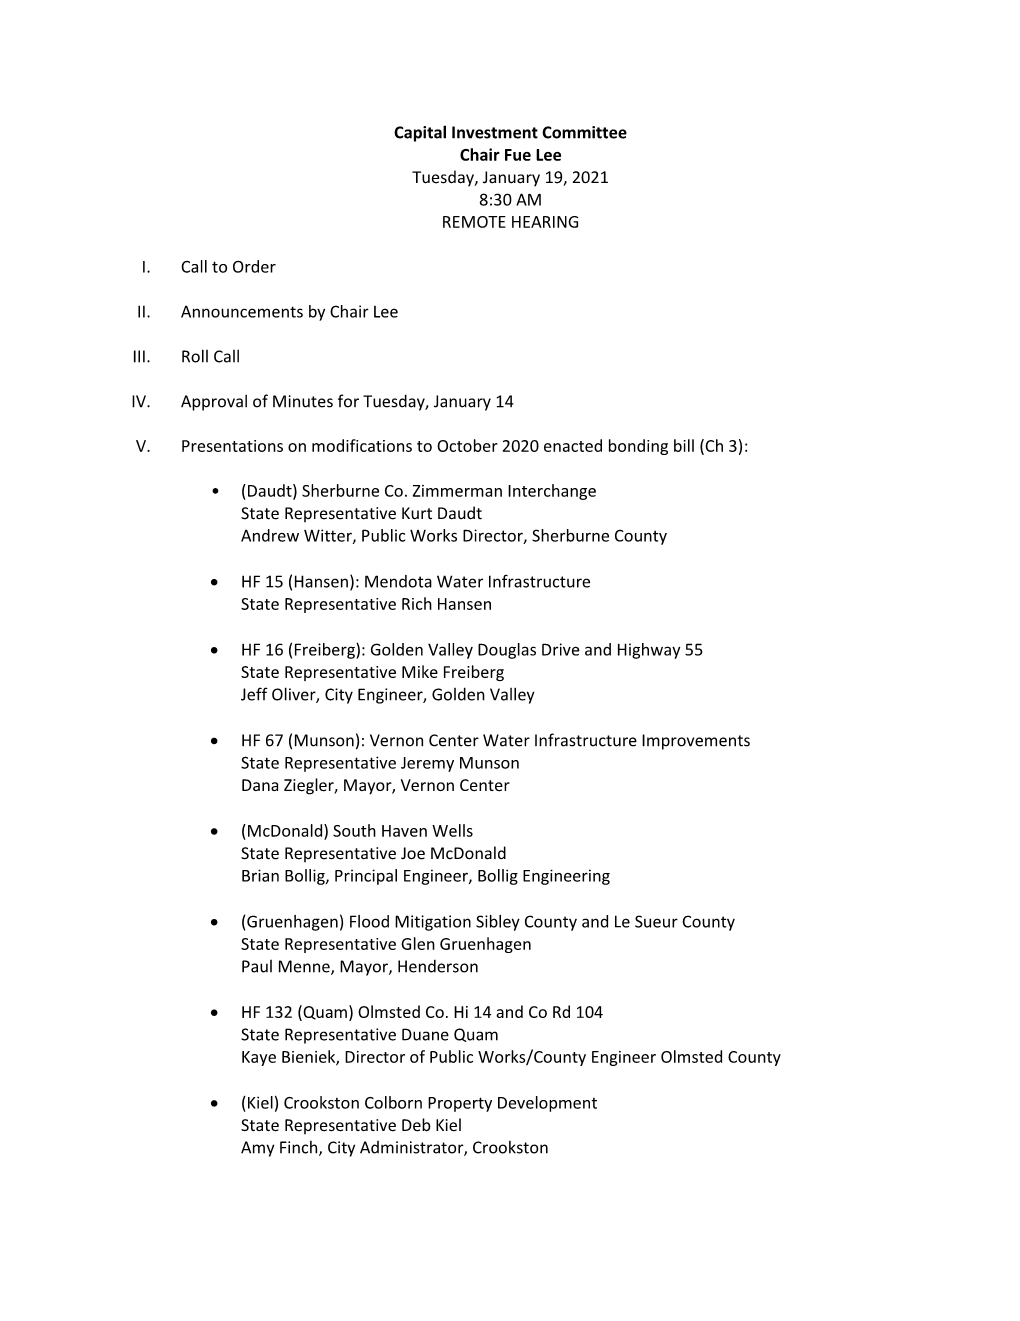 Capital Investment Committee Chair Fue Lee Tuesday, January 19, 2021 8:30 AM REMOTE HEARING I. Call to Order II. Announcements